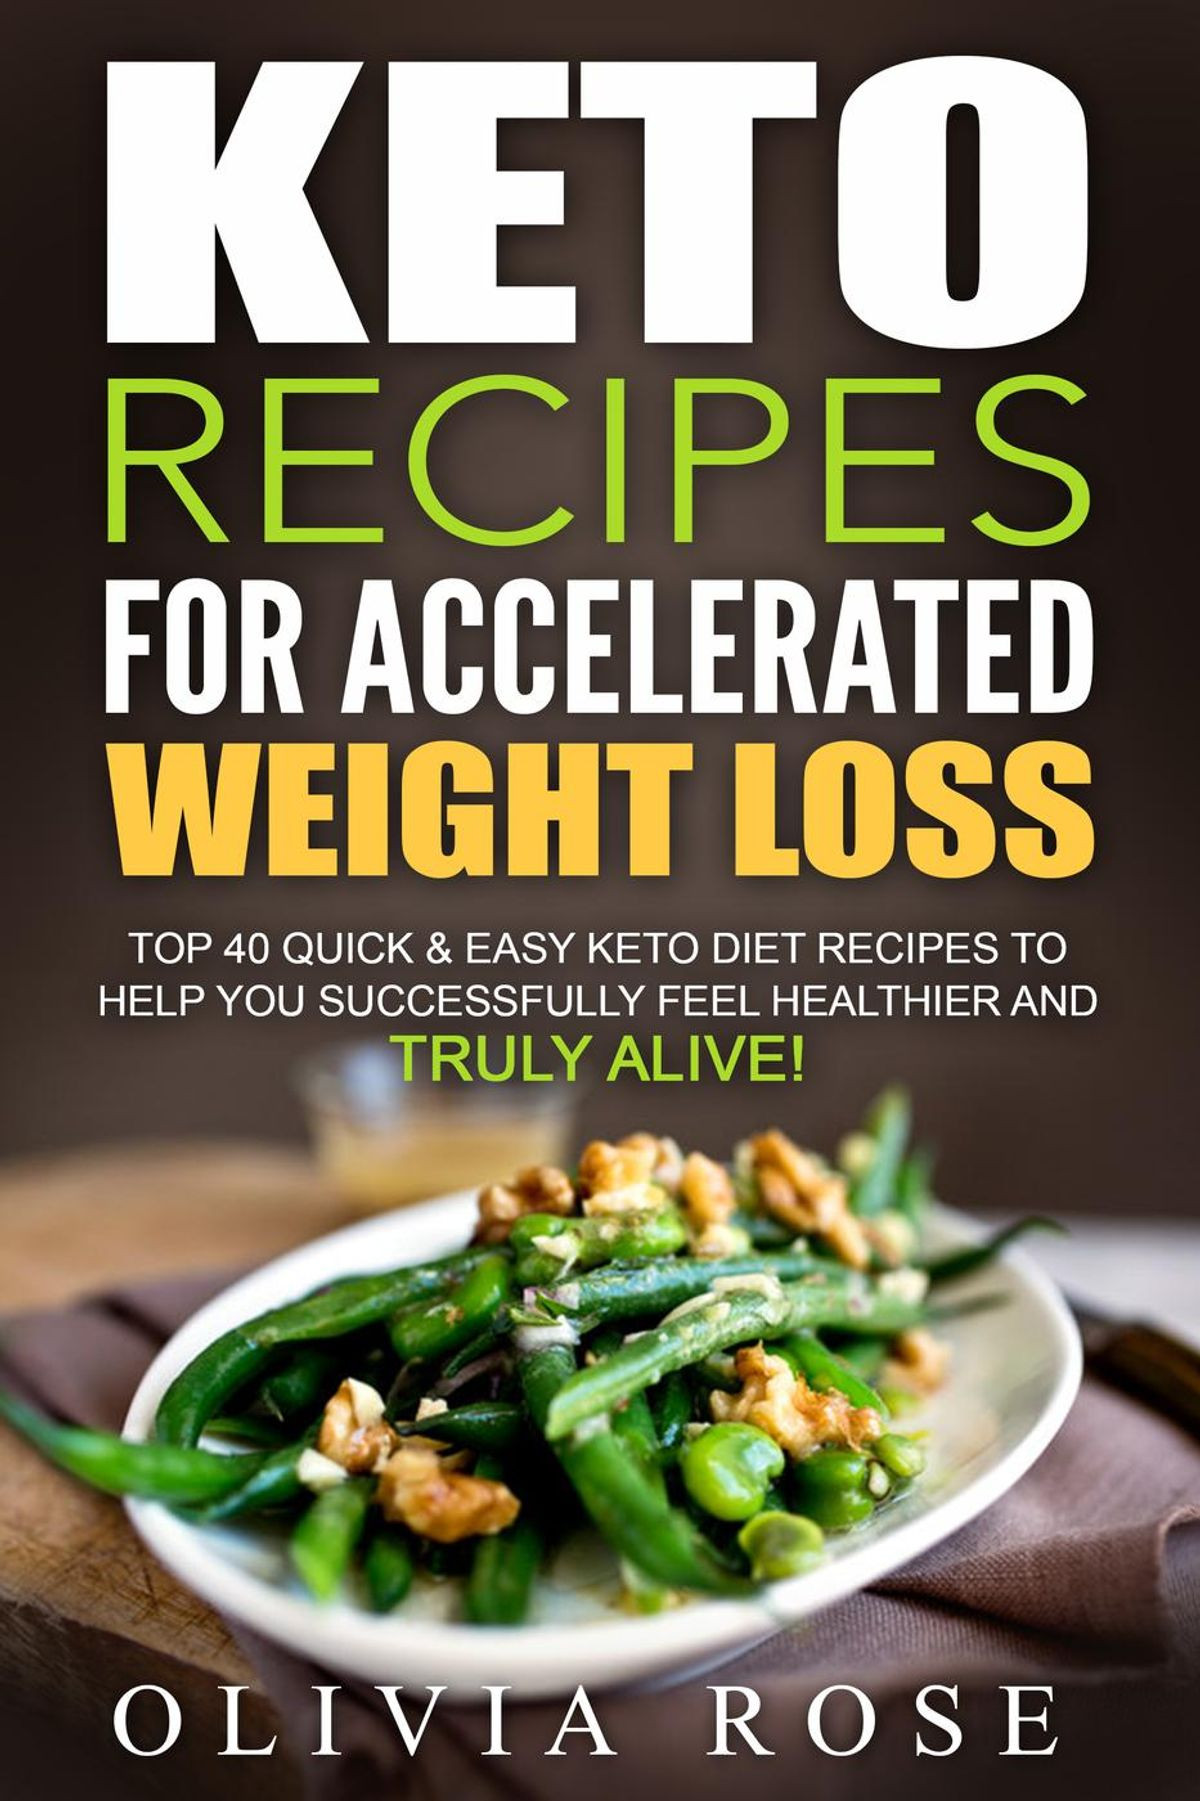 Quick Weight Loss Diet Recipes
 Keto Recipes for Accelerated Weight Loss Top 40 Quick